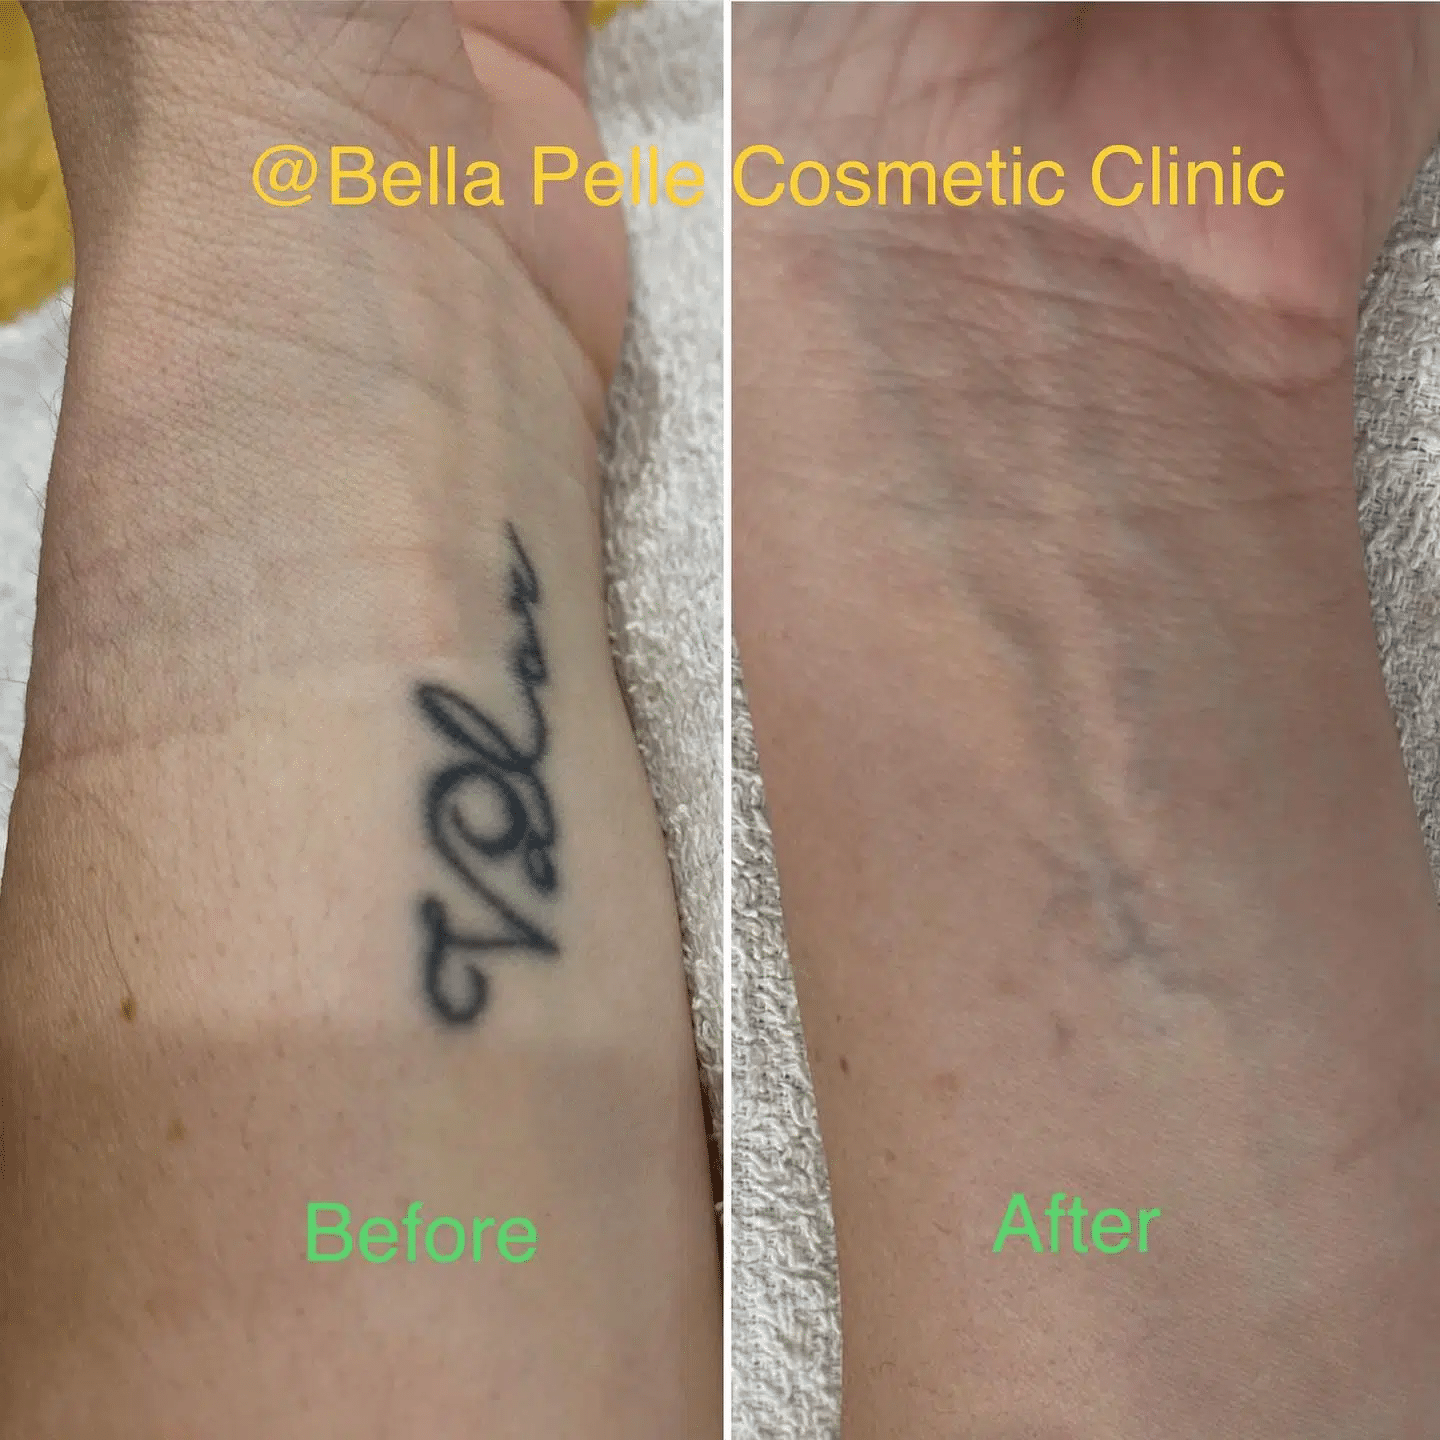 Laser Tattoo Removal Sydney | PicoSure Tattoo Removal